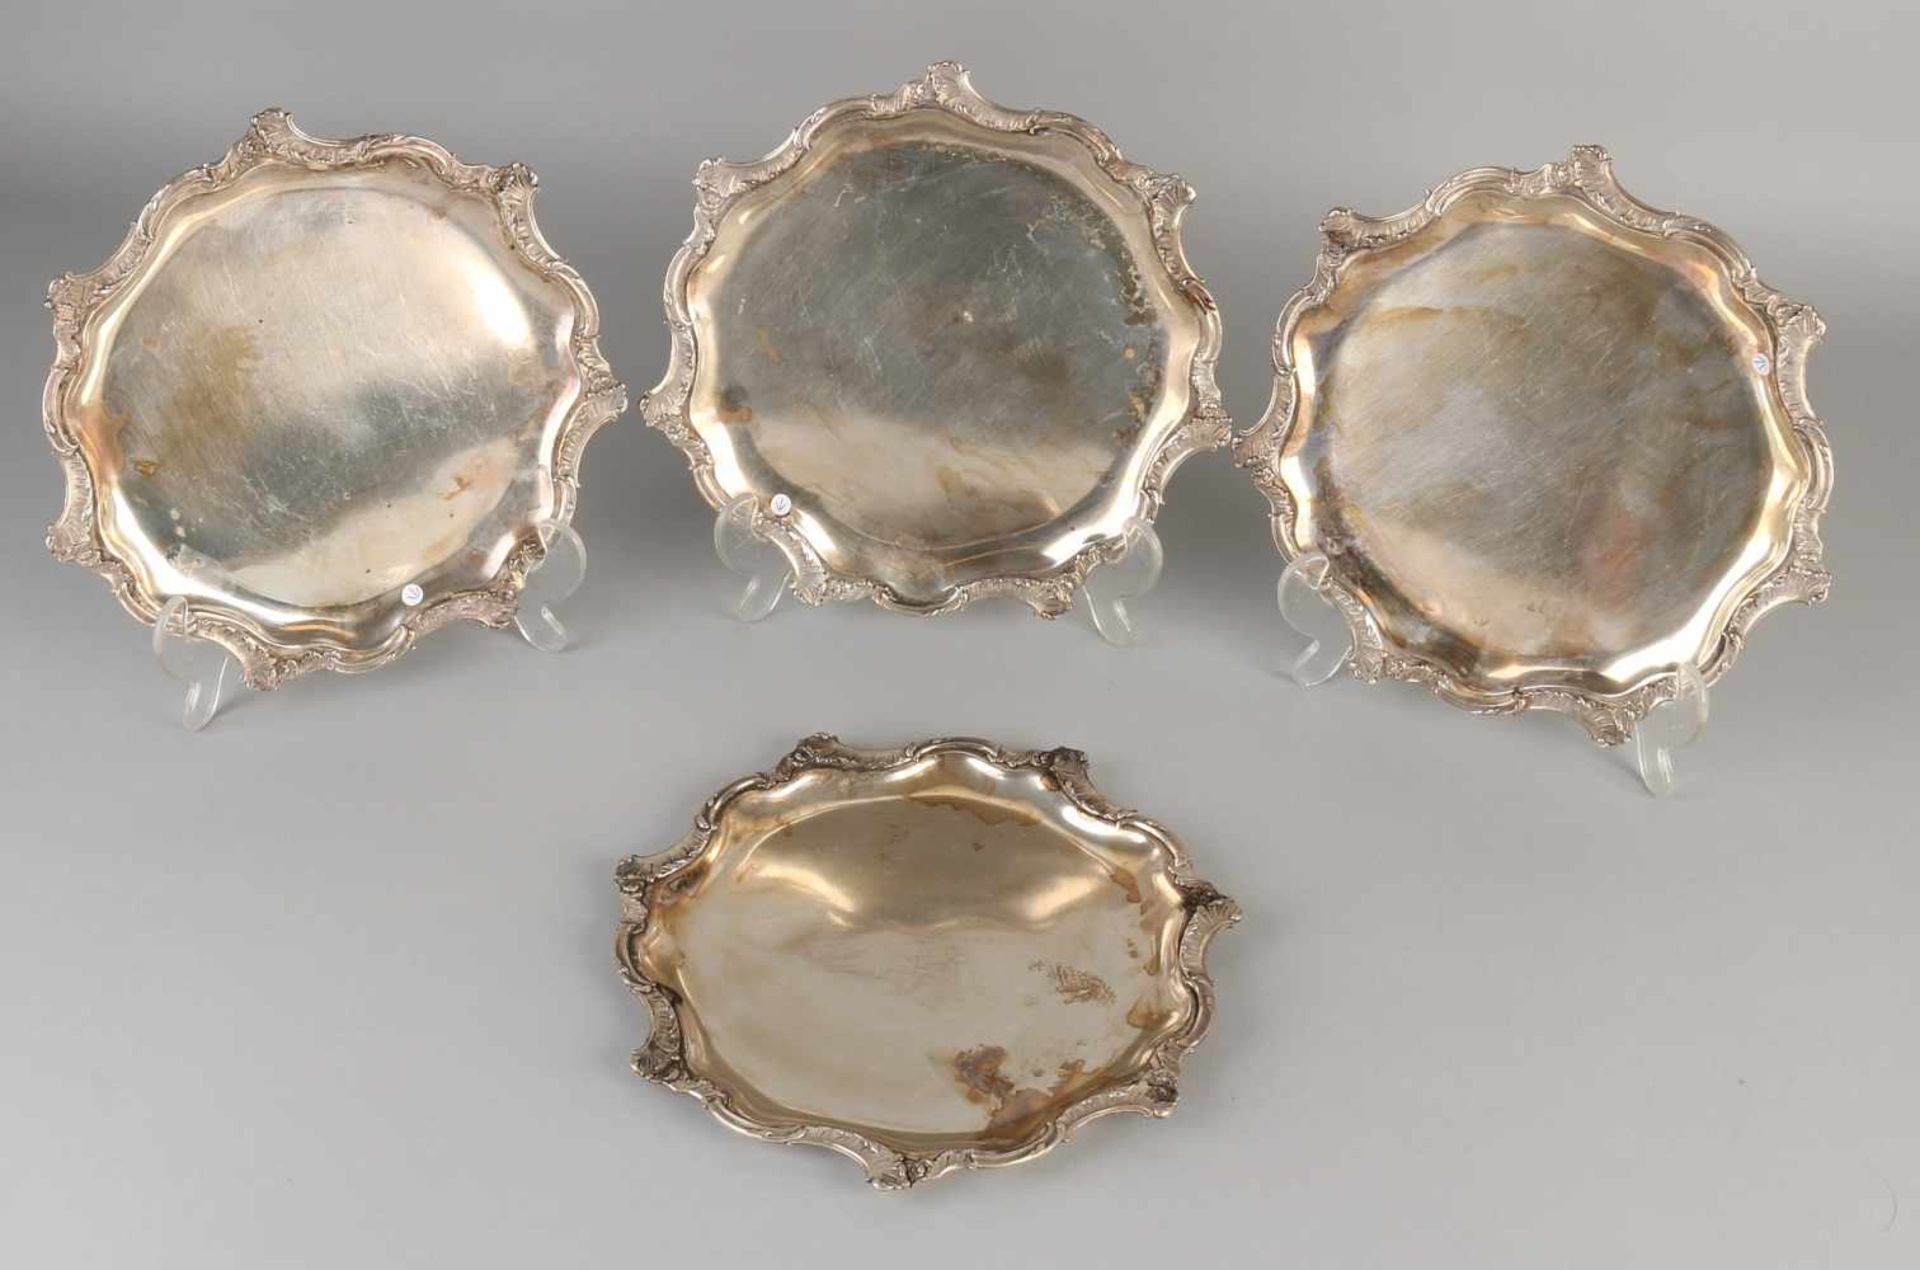 Four silver plates coasters, 800/000, round molded coasters with a border of scrolls with leaf